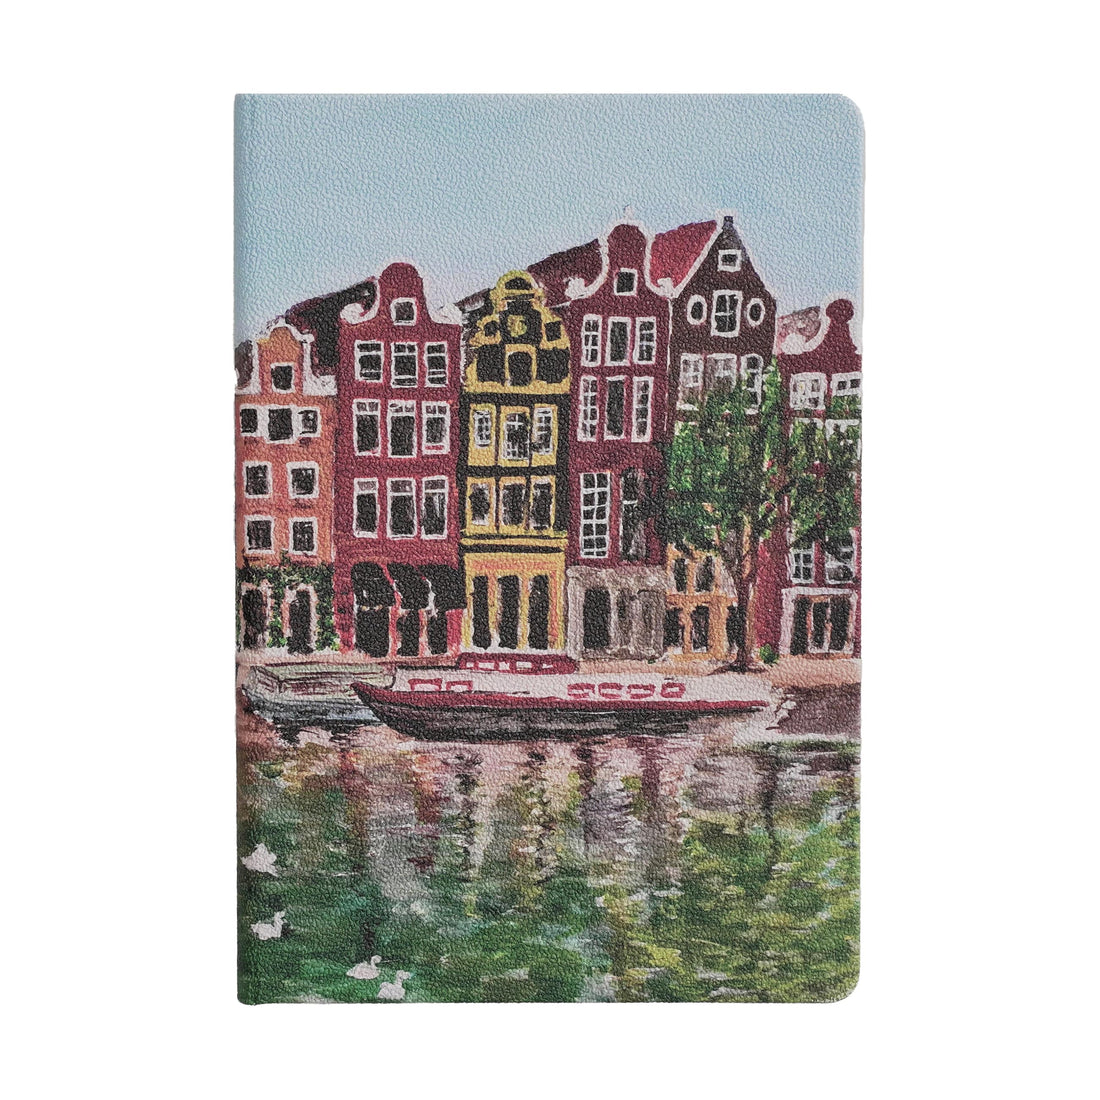 CANAL HOUSE, Dreamscape Collection, A5 Hardcover Diary, Lined